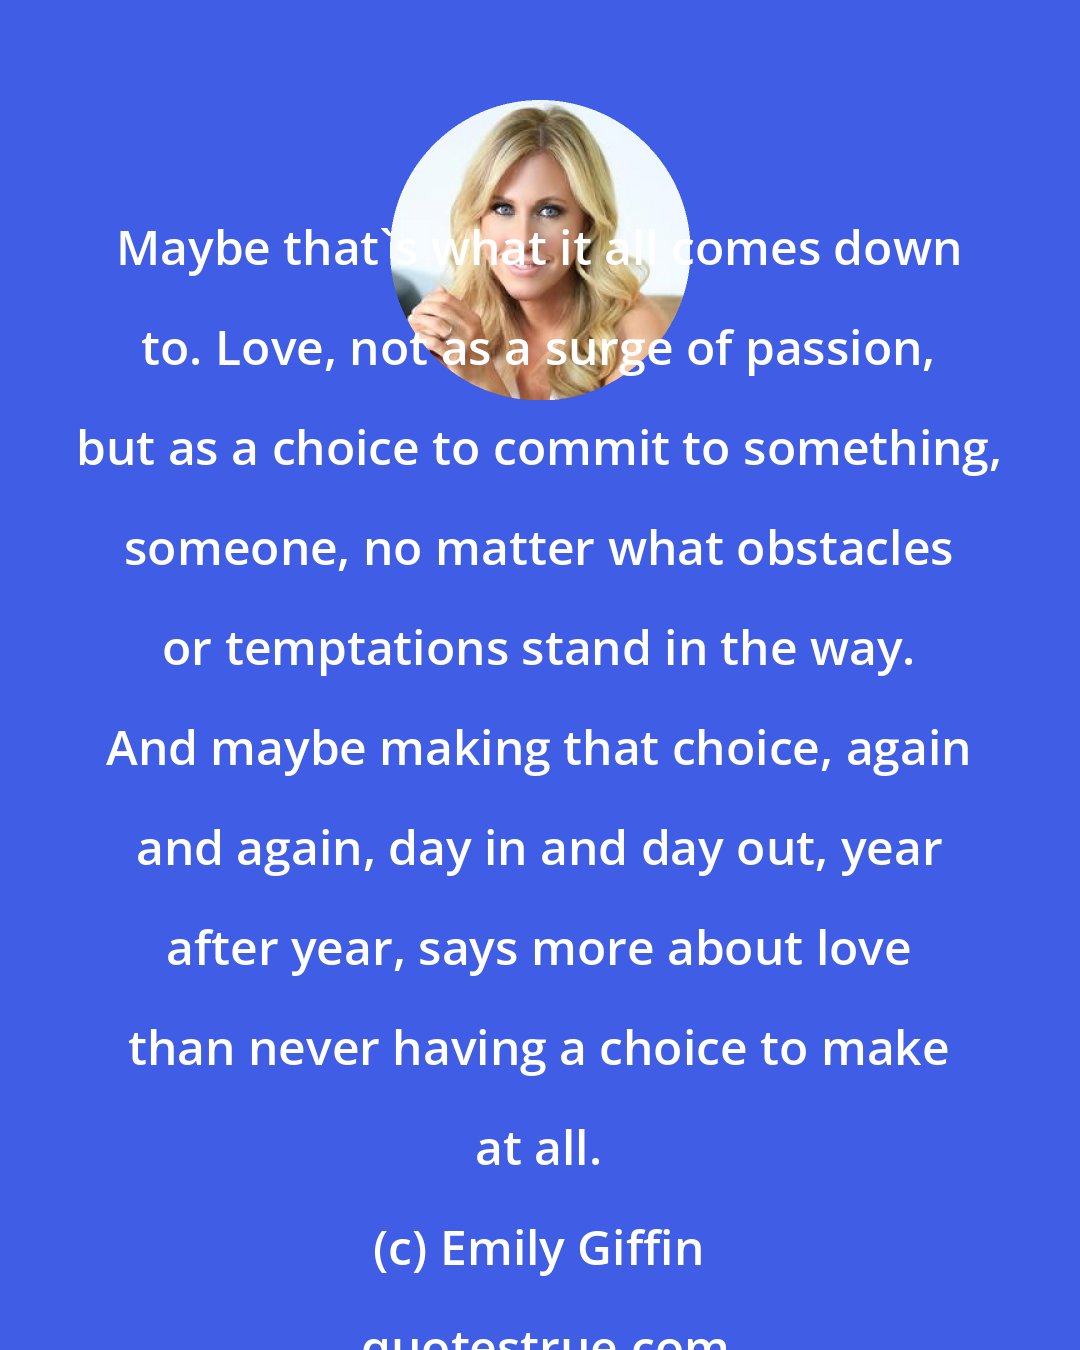 Emily Giffin: Maybe that's what it all comes down to. Love, not as a surge of passion, but as a choice to commit to something, someone, no matter what obstacles or temptations stand in the way. And maybe making that choice, again and again, day in and day out, year after year, says more about love than never having a choice to make at all.